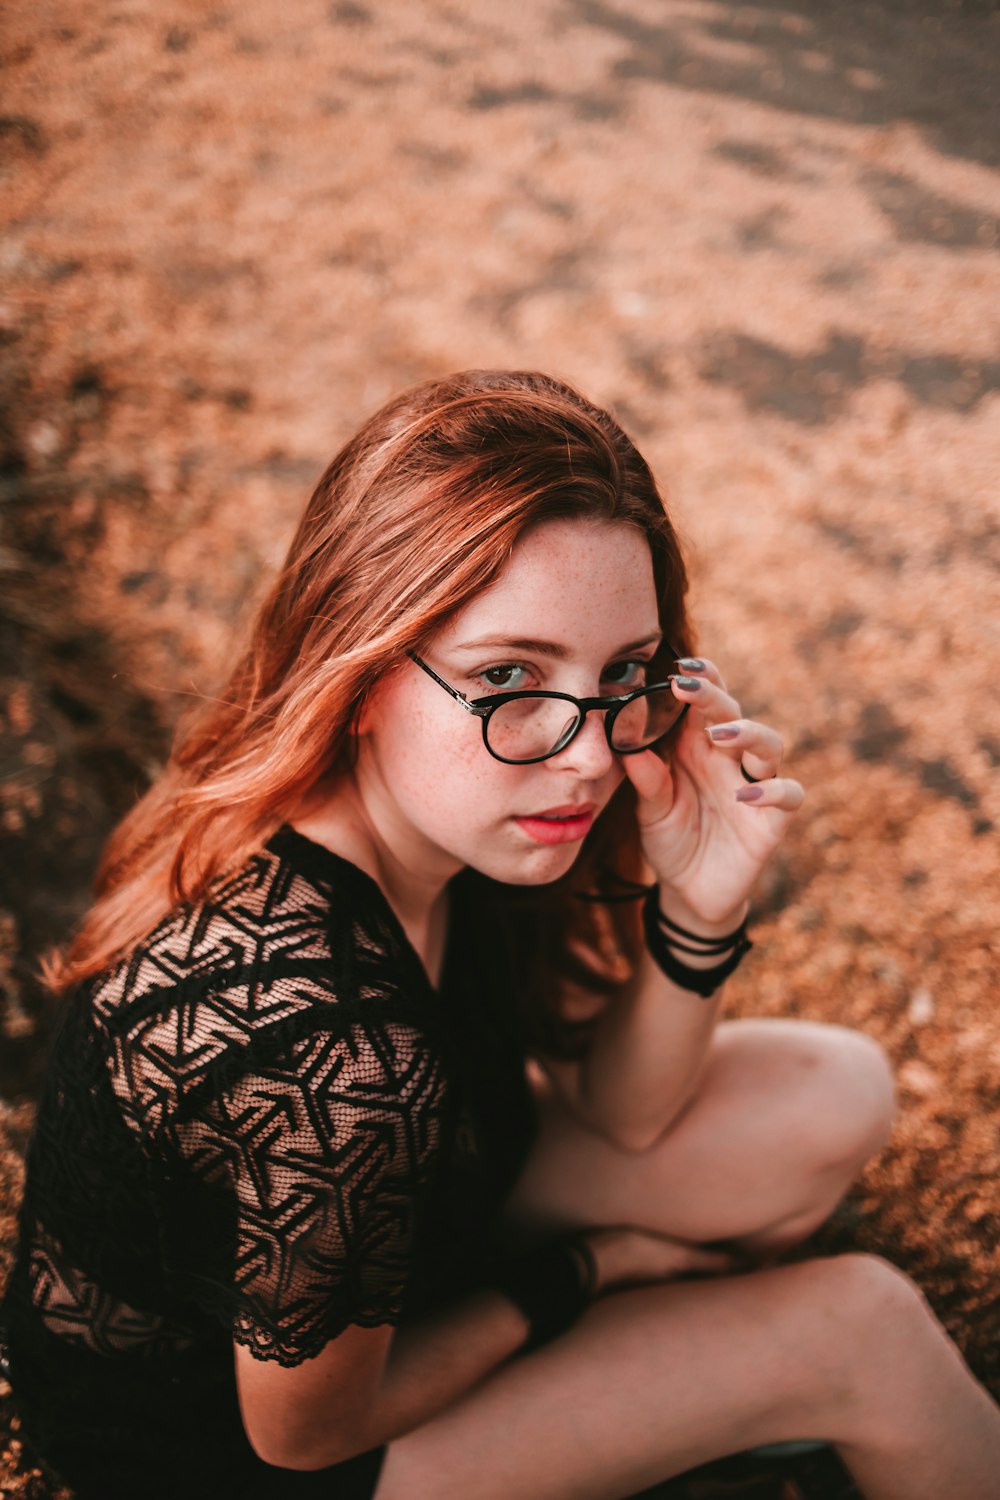 selective focus photography of sitting woman wearing black dress holding her eyeglasses